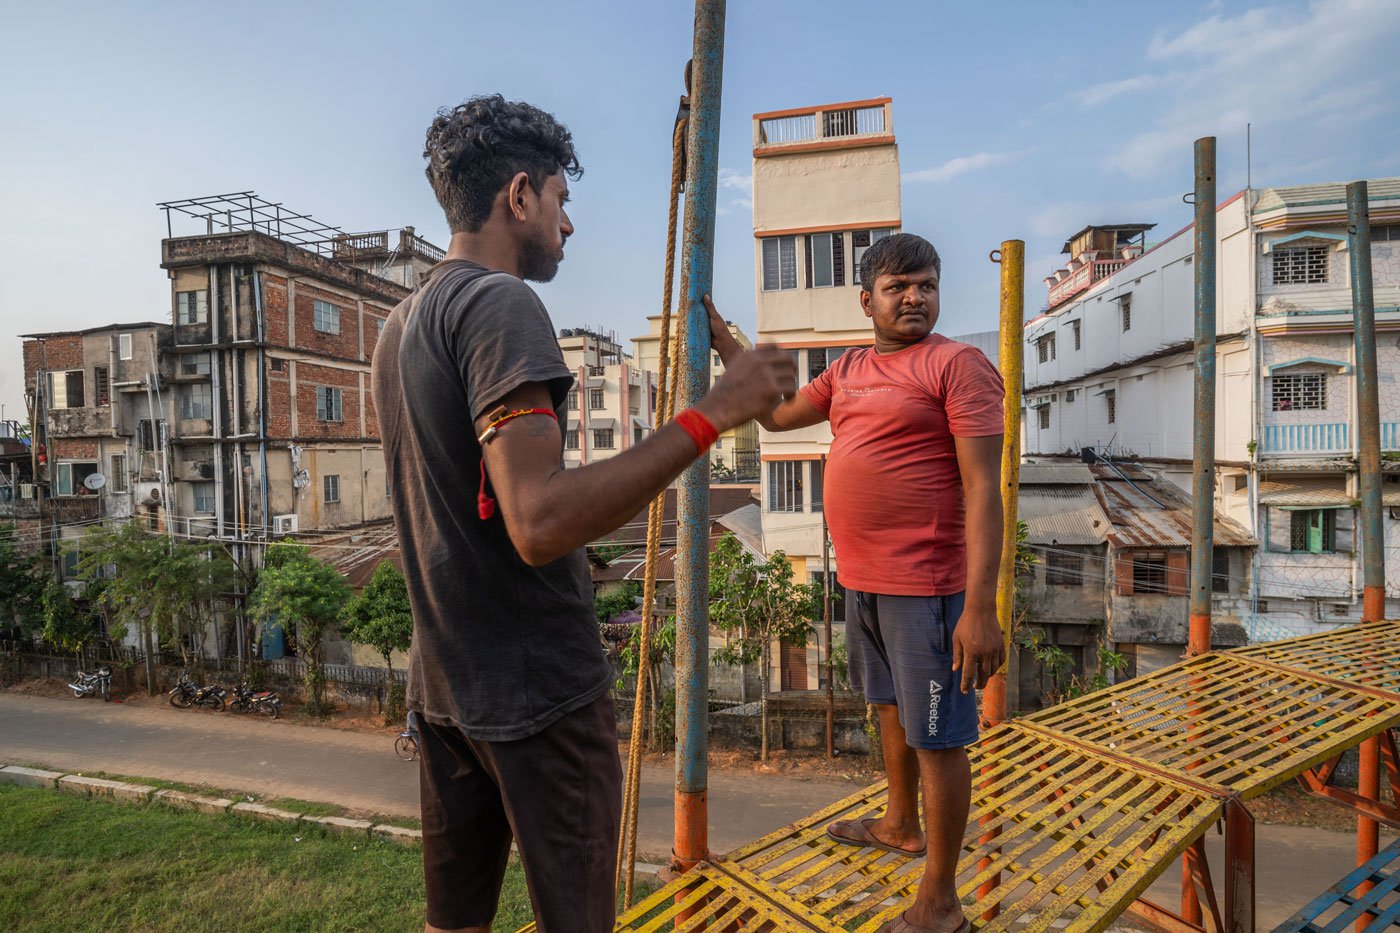 The riders are also the ones setting up the well-like structures. Here Pankaj Kumar (left) and Rubel Sheikh (right) are working on the set-up for a mela for Durga Puja in October 2023 in Agartala, Tripura